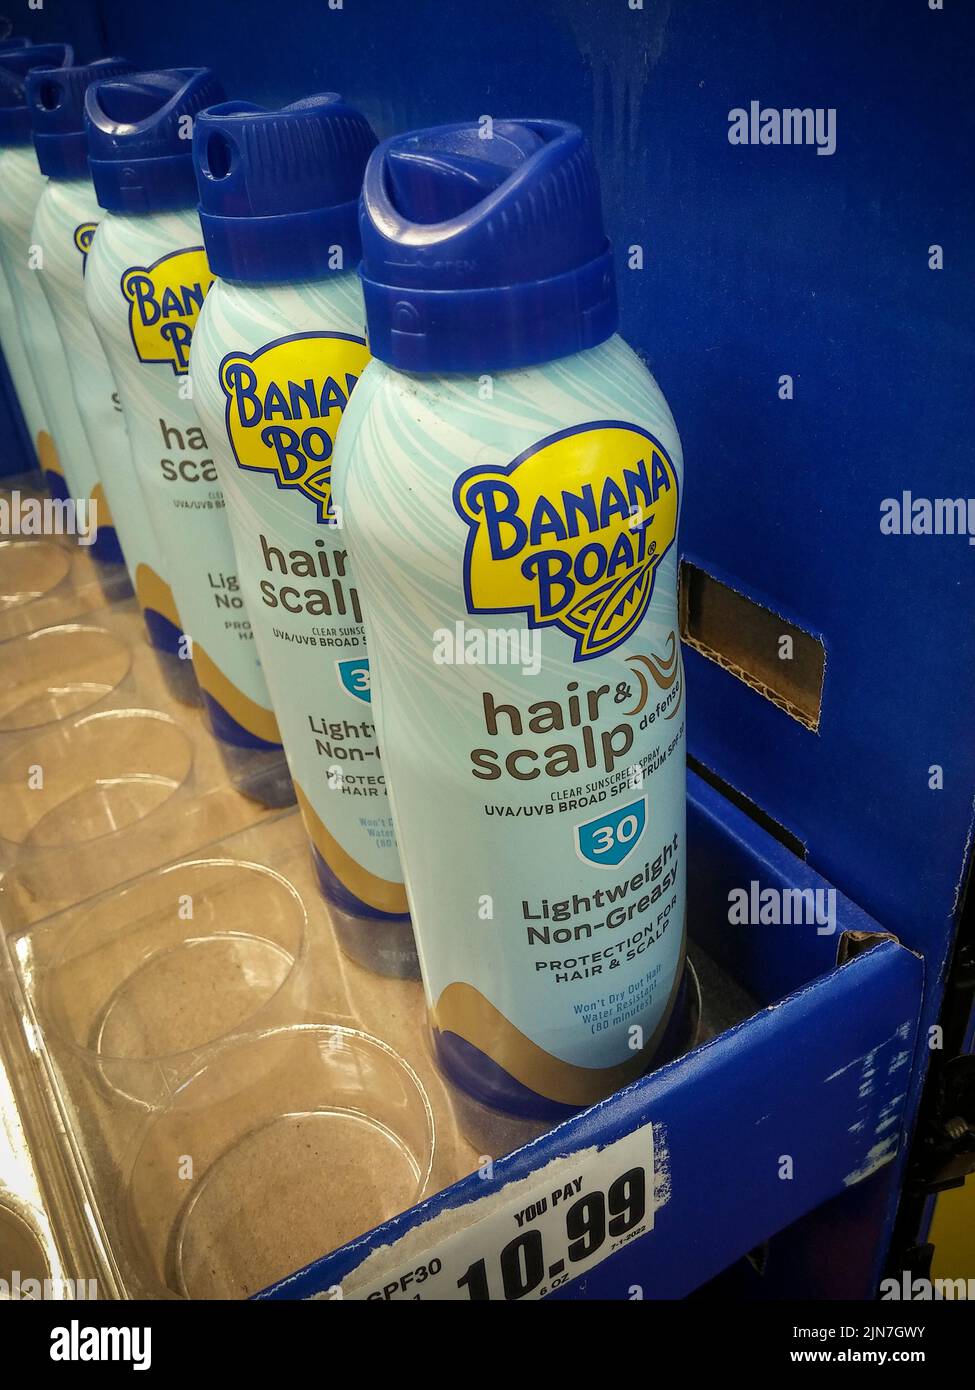 Bottles of Banana Boat brand Hair and Scalp Sunscreen Spray SPF 30 are seen on a store shelf in New York on Sunday, July 31, 2022. The product is the subject of a recall because of the presence of trace amounts of benzene.(© Richard B. Levine) Stock Photo